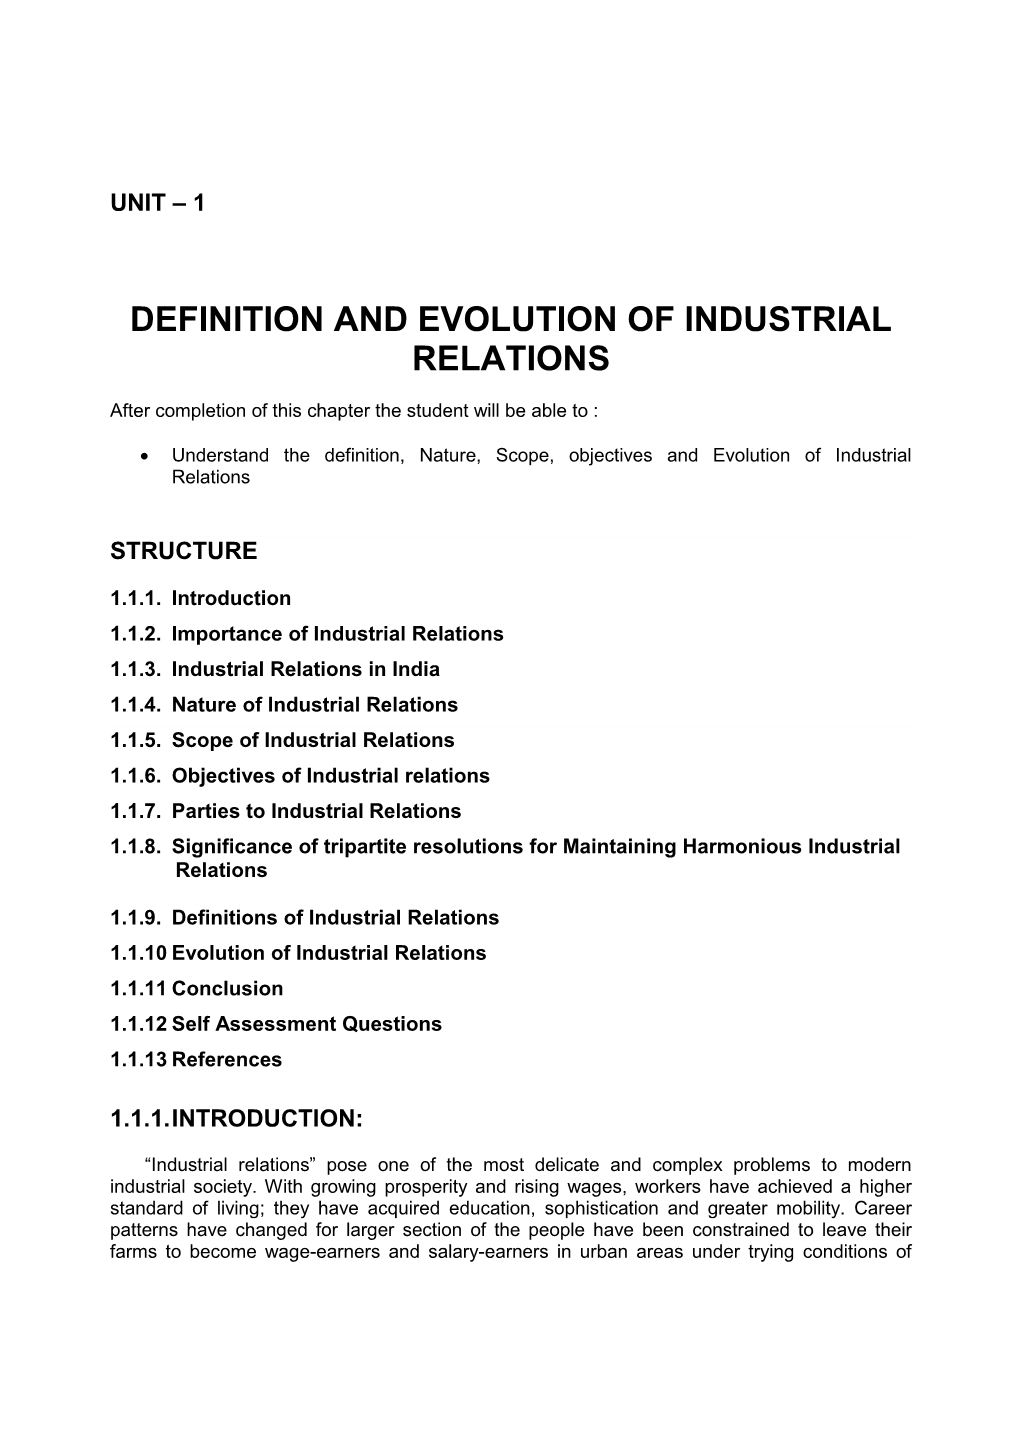 Definition and Evolution of Industrial Relations